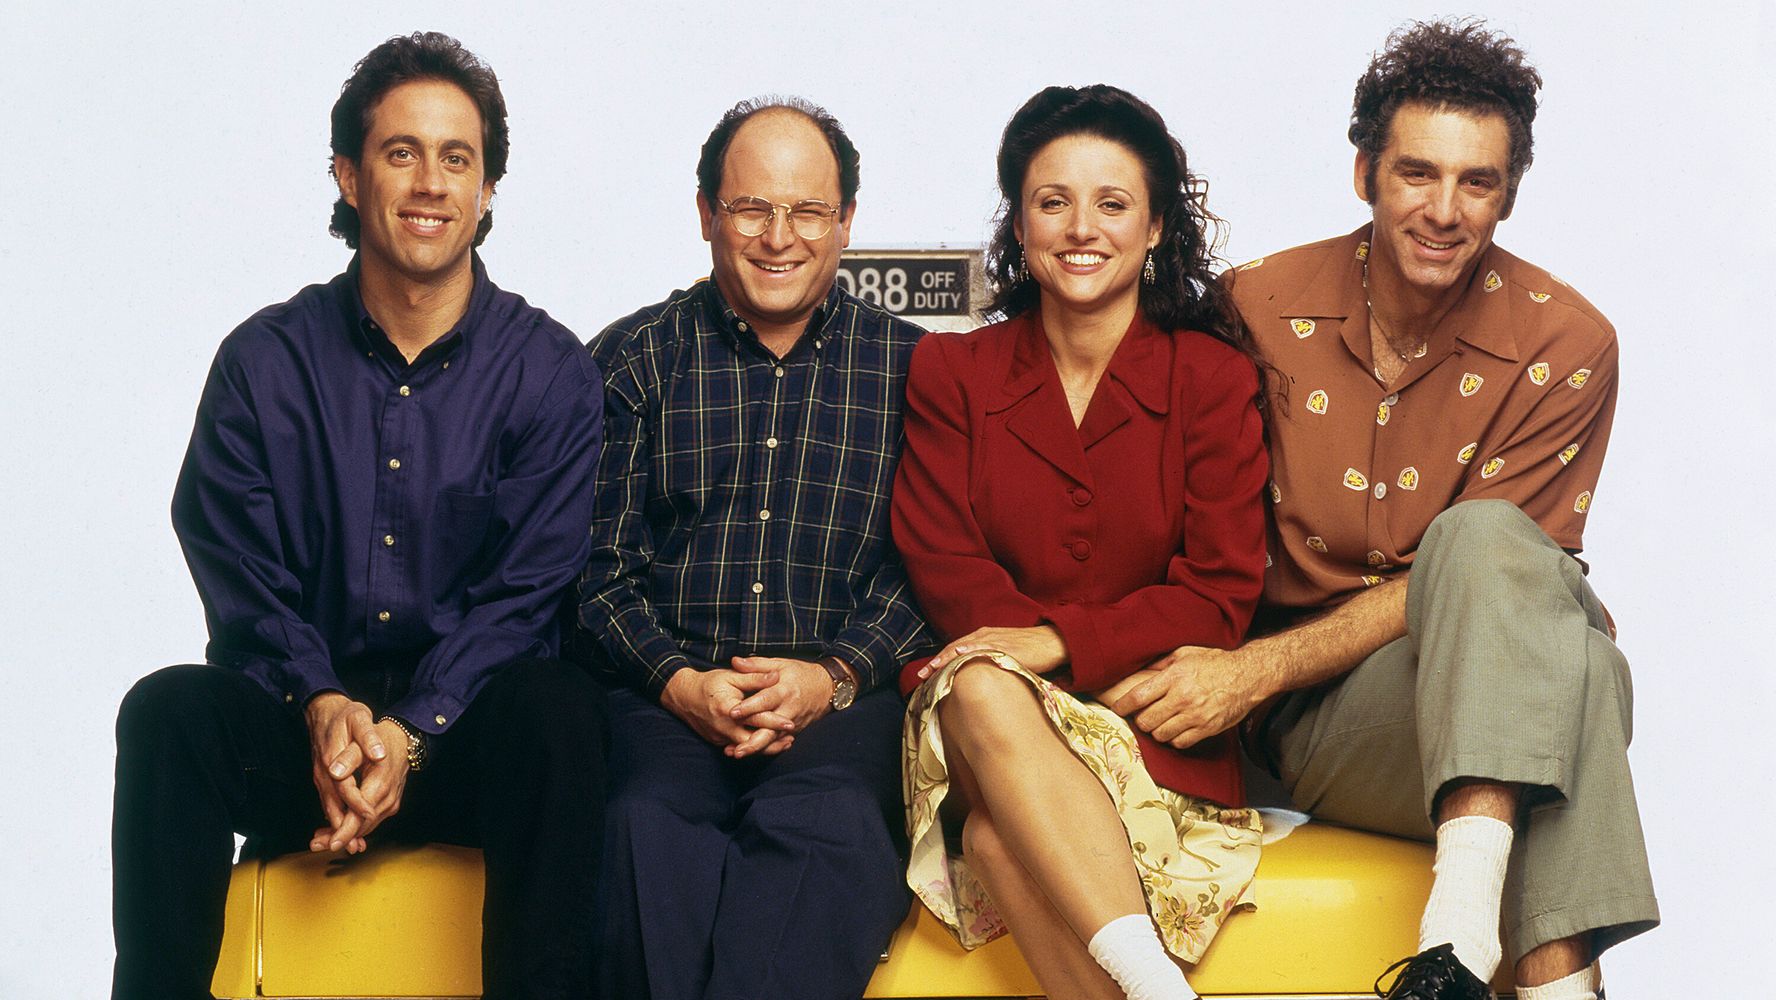 New On Netflix October 2021: 'Seinfeld,' 'Maid,' 'You' And More